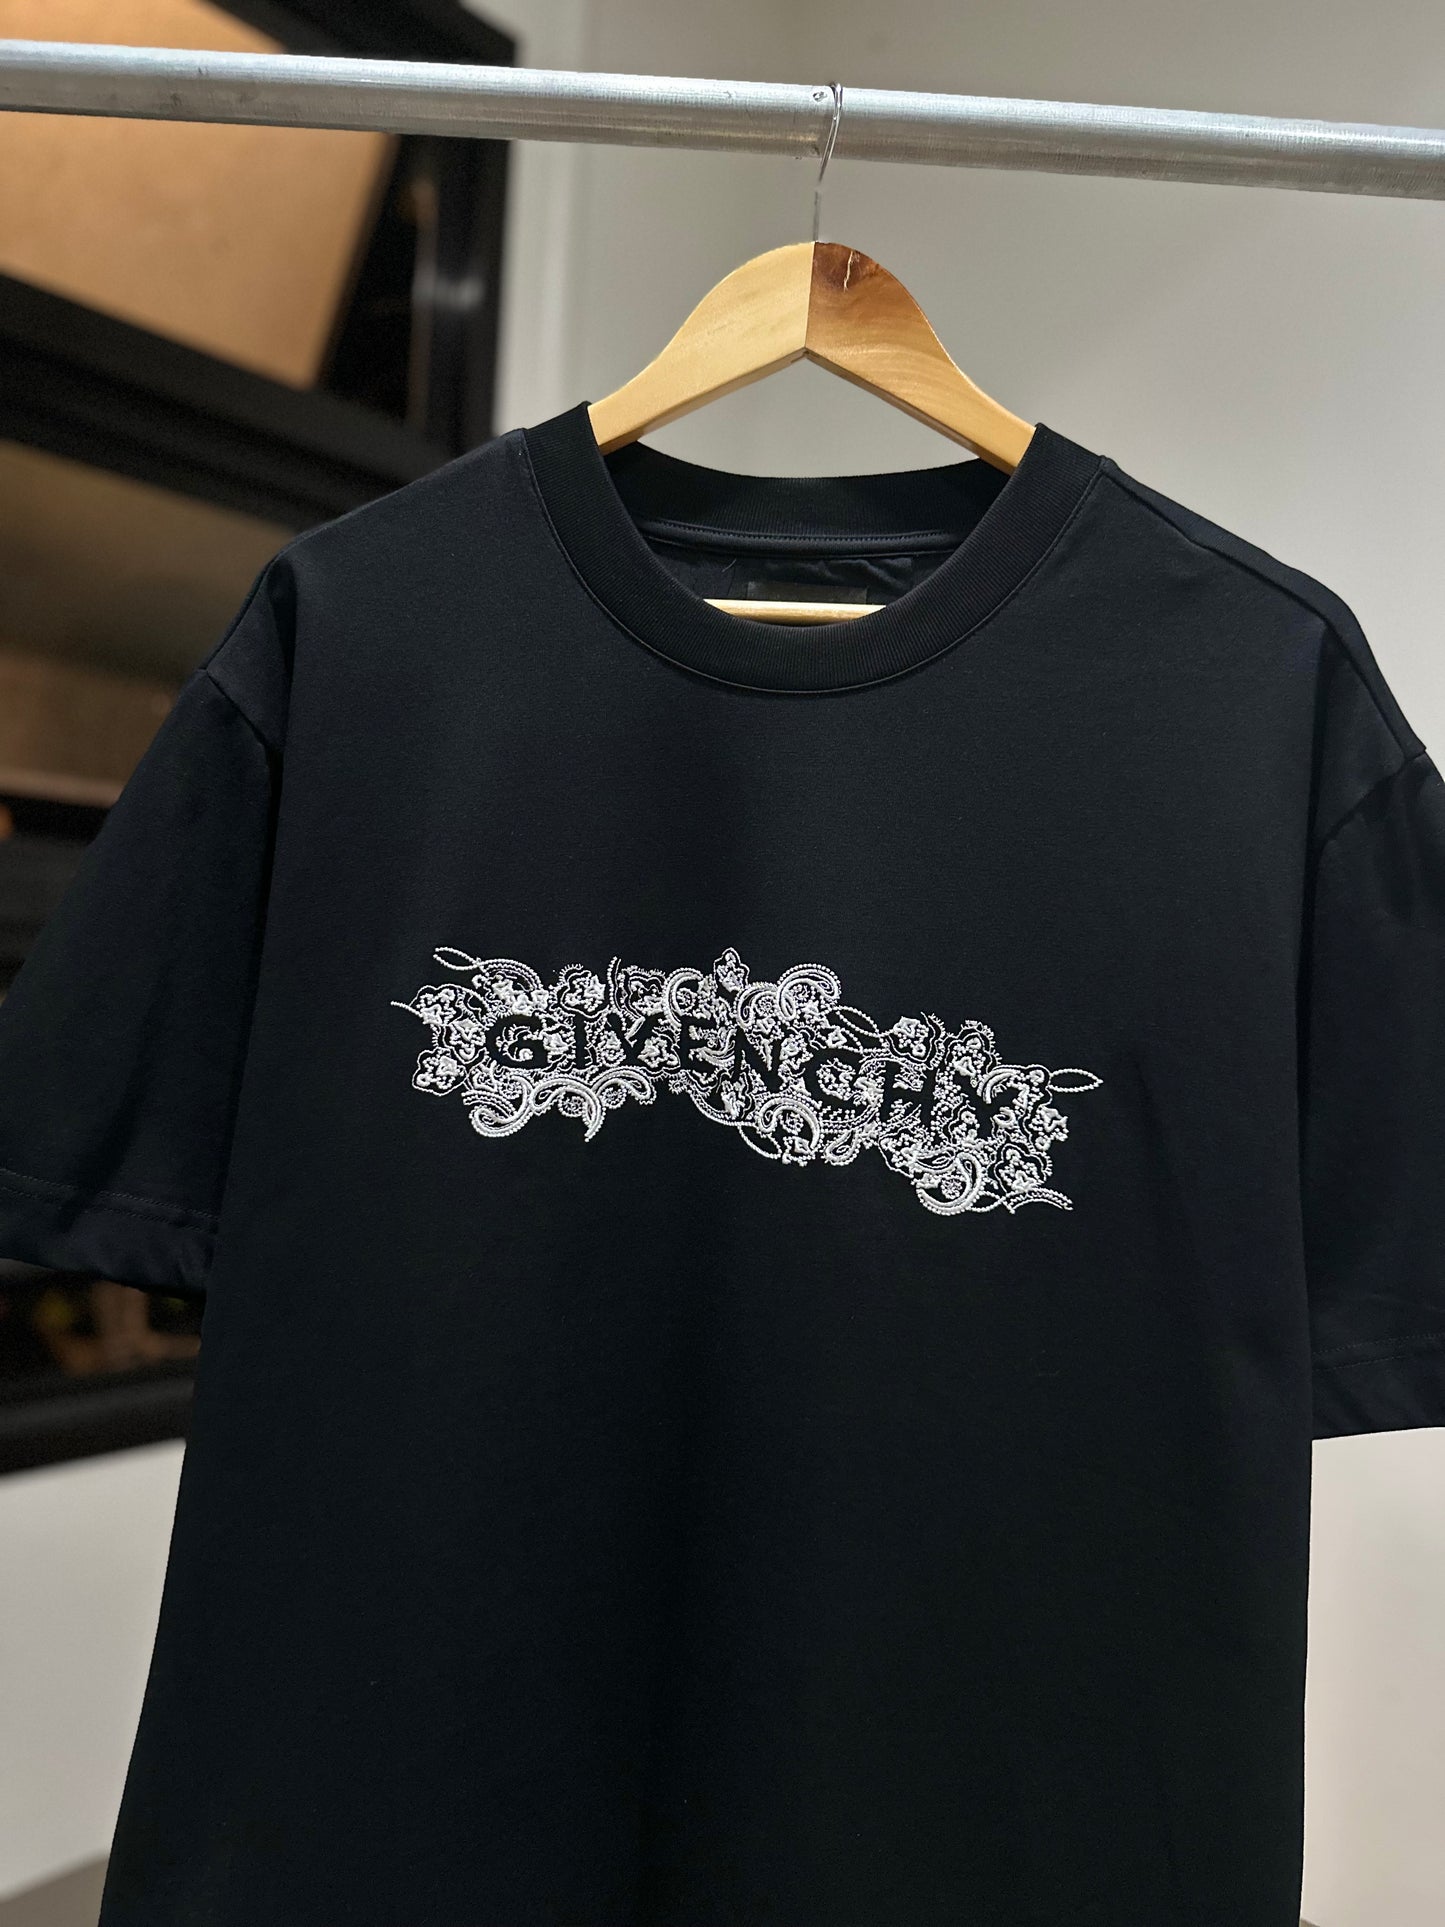 Givenchy T-Shirt (Embroid/Black)